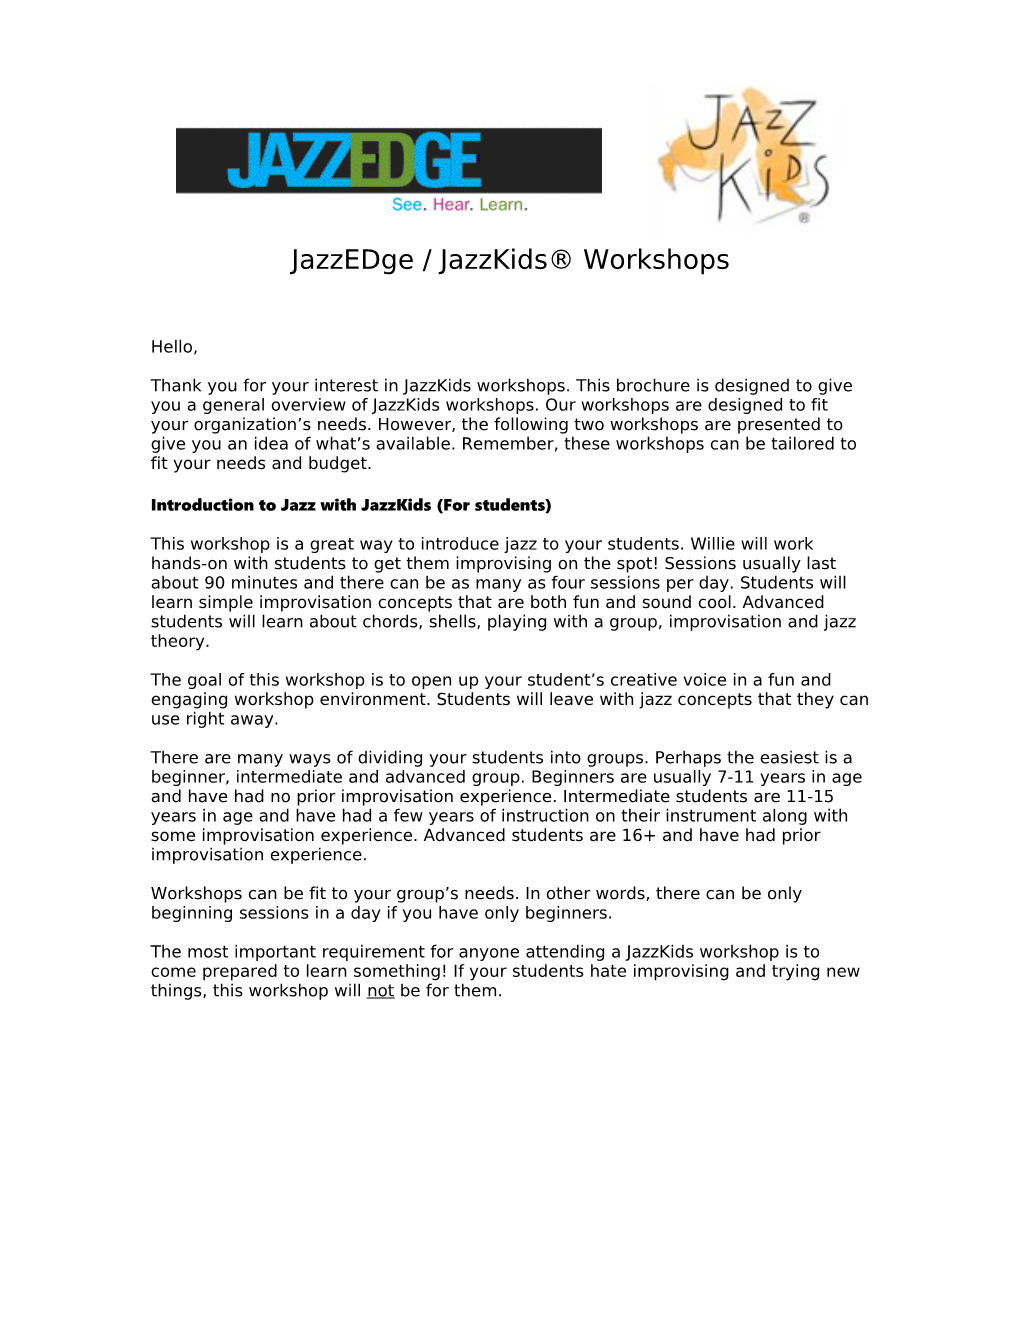 Jazzkids Workshops Are Designed to Fit Your Organization S Needs